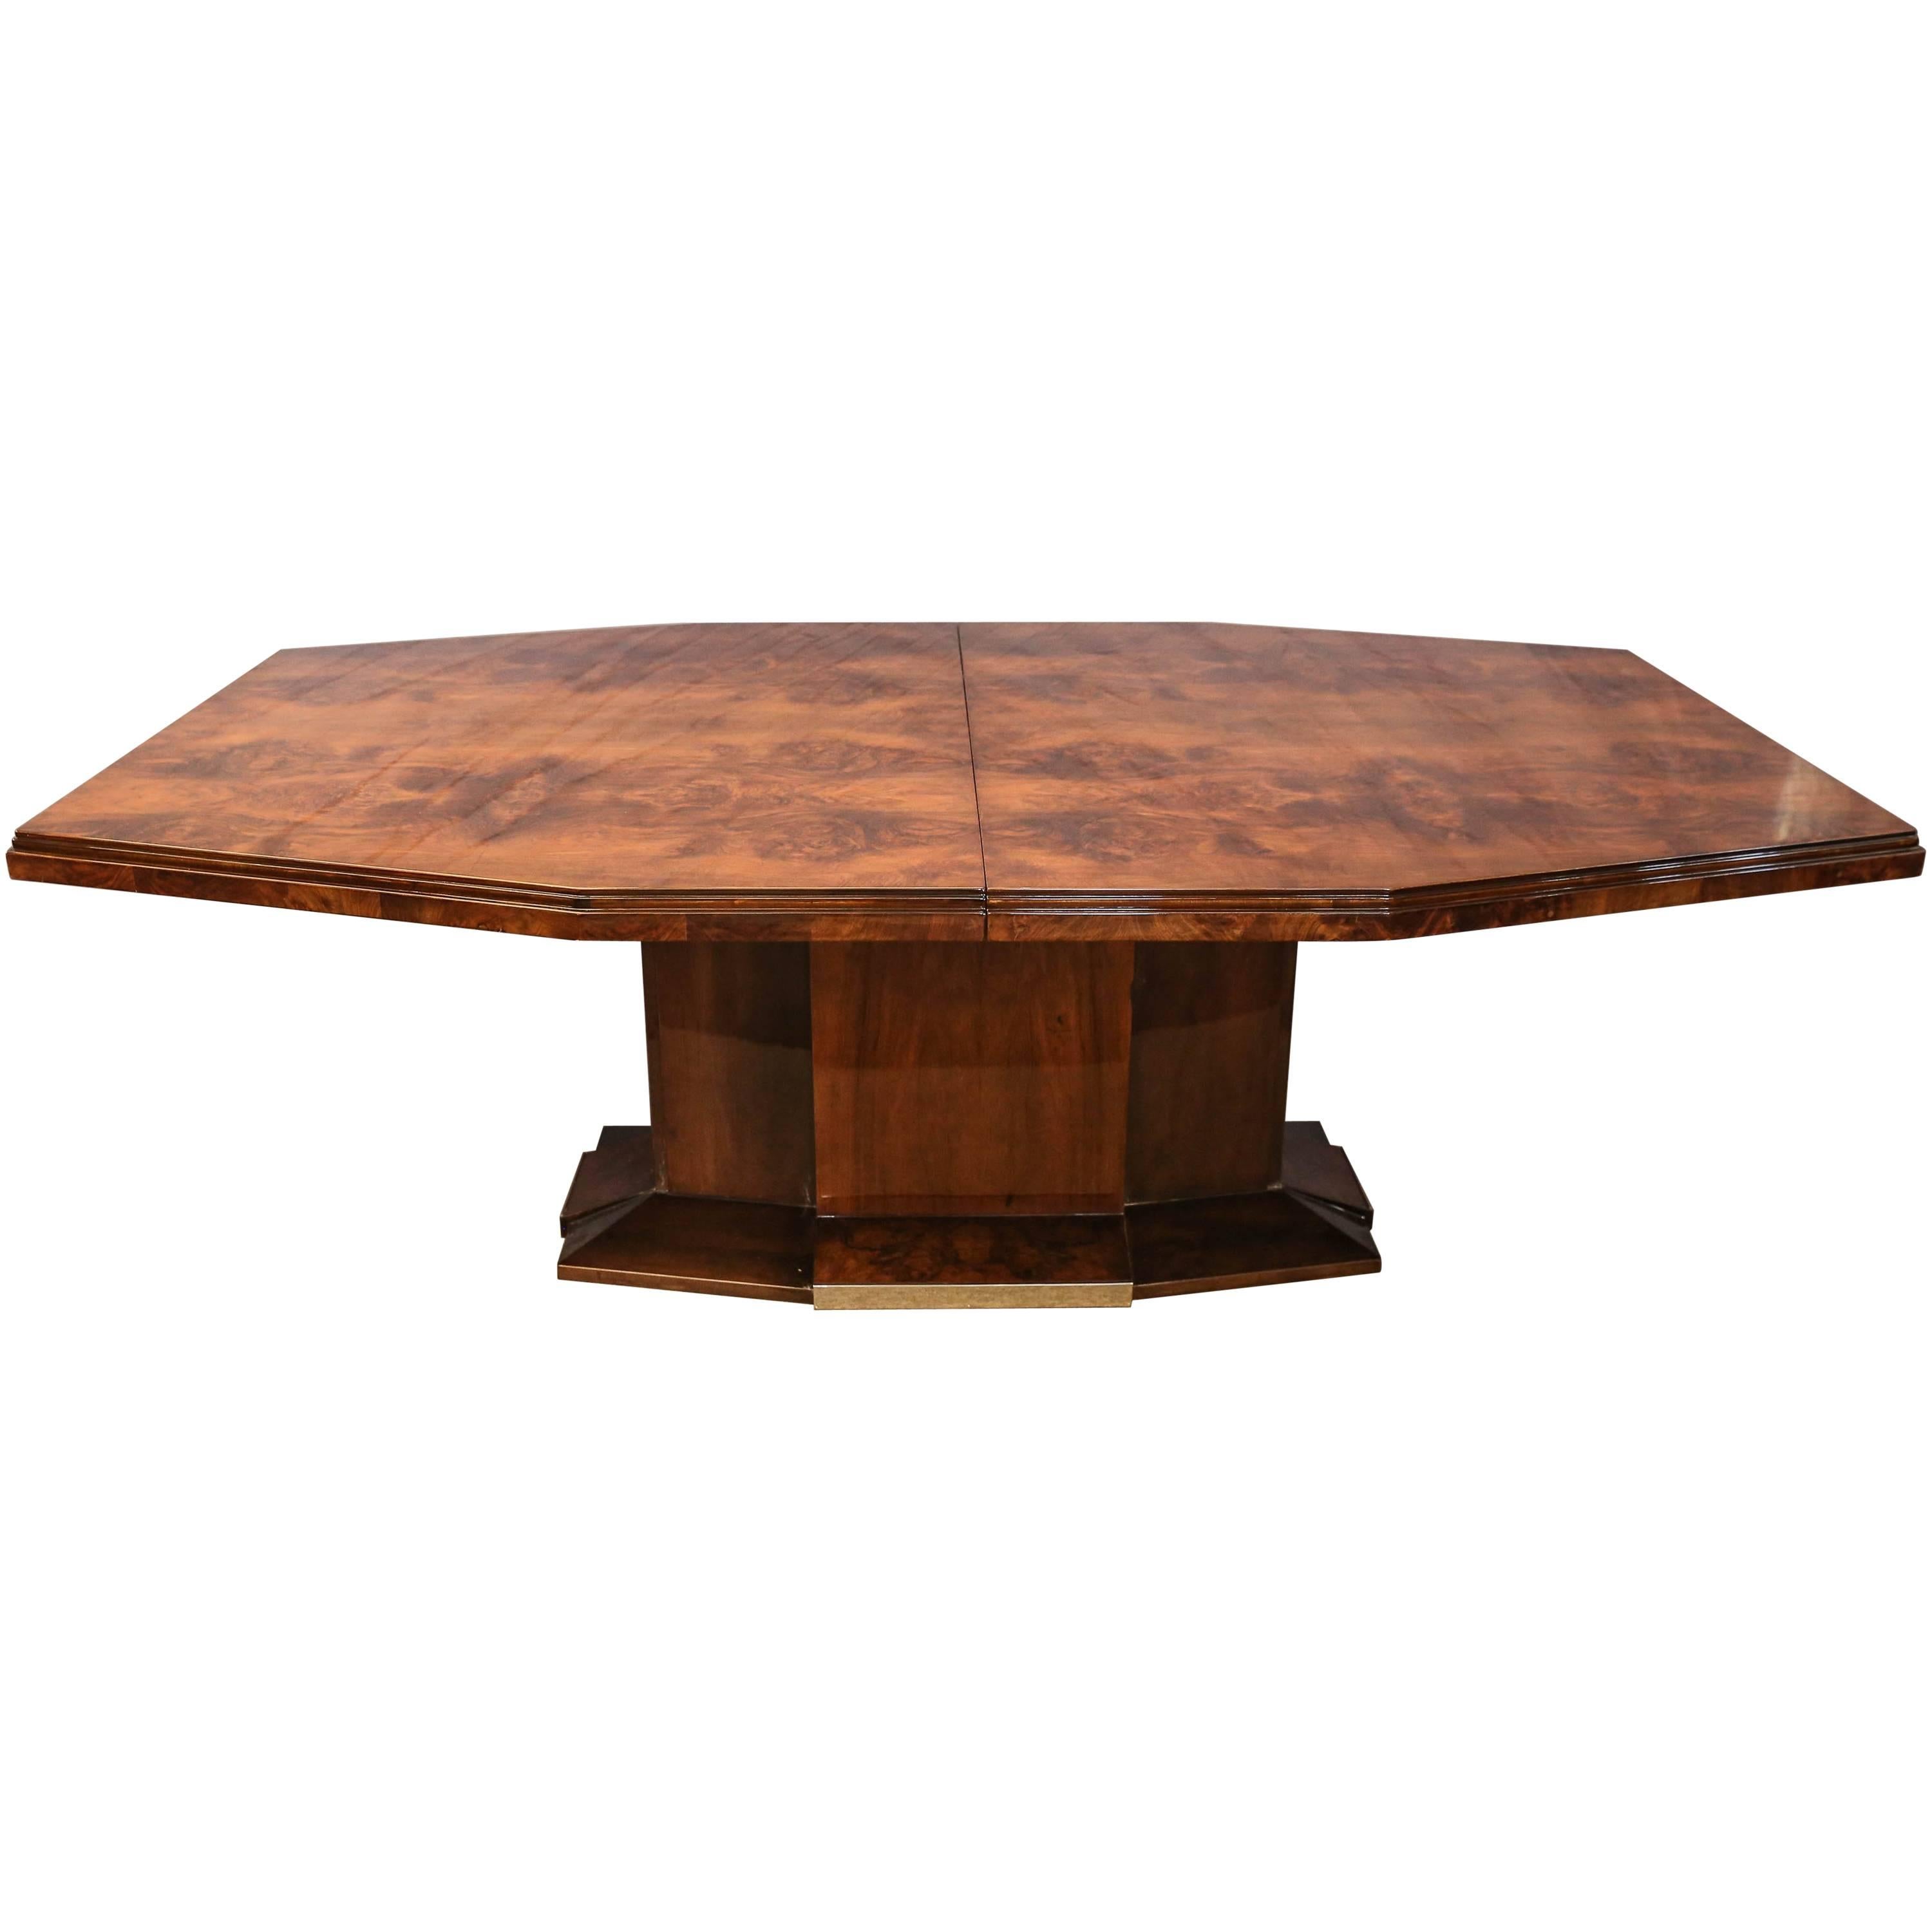 French Art Deco Dining Room Table in Burl Walnut